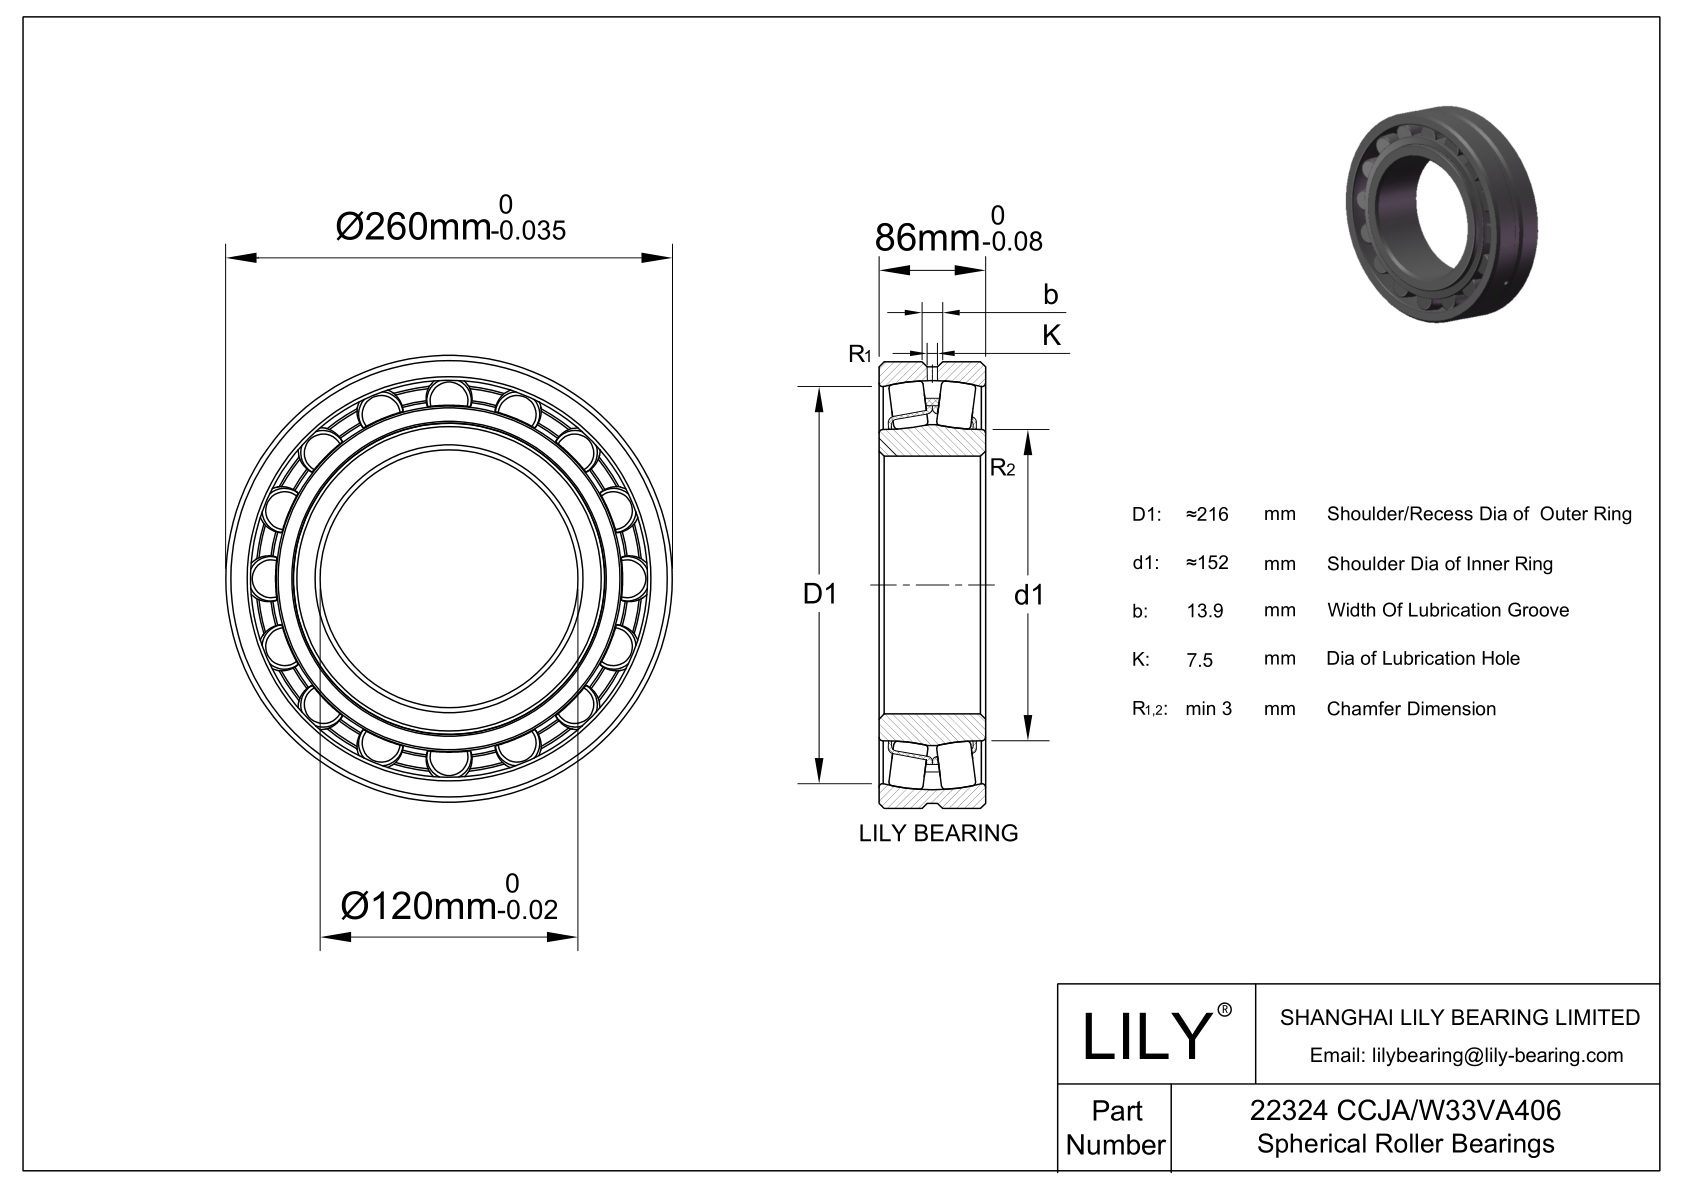 22324 CCJA/W33VA406 Double Row Spherical Roller Bearing cad drawing